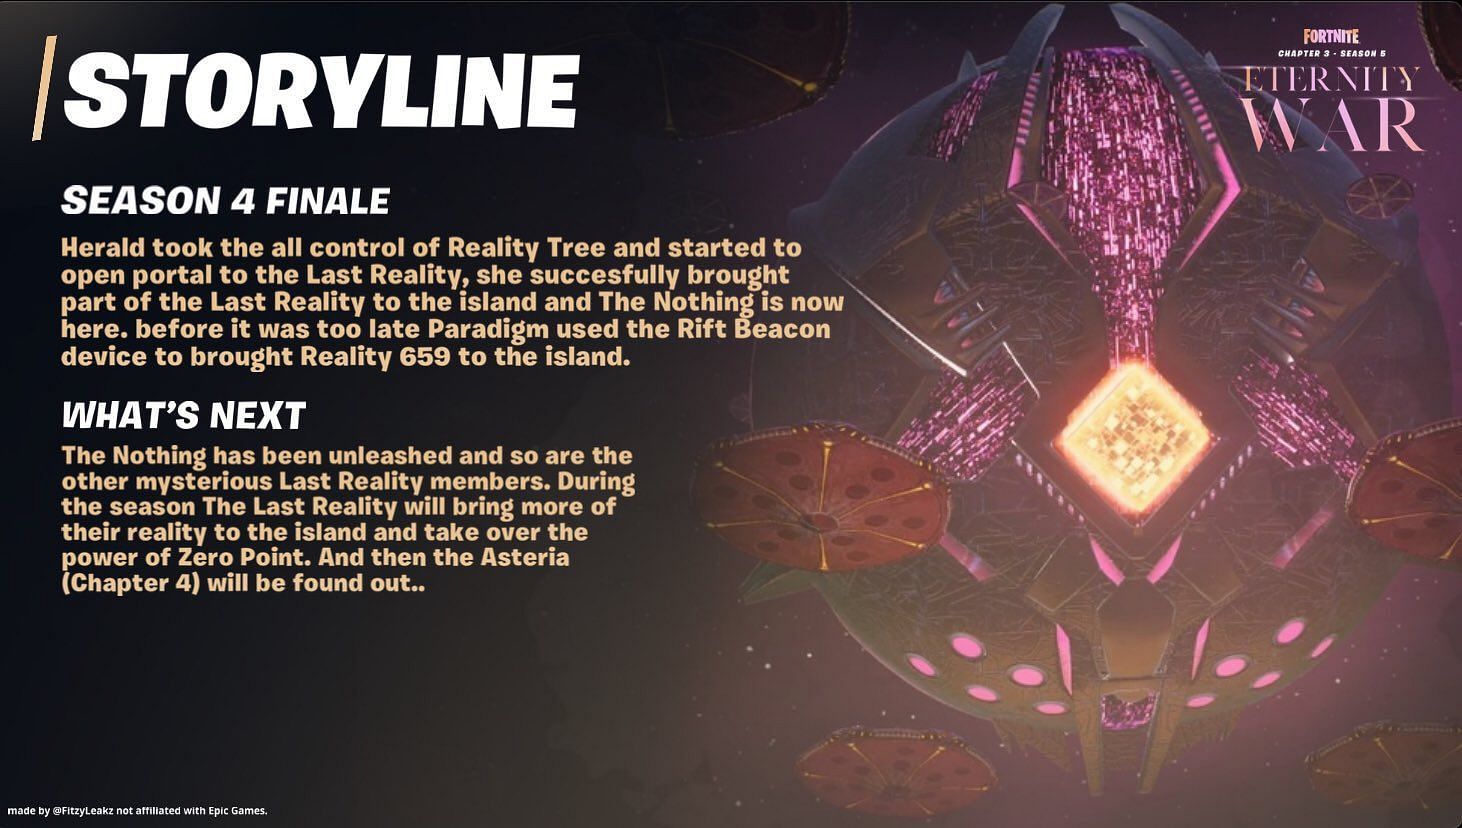 The new Fortnite Chapter 4 concept looks fantastic and reveals many details (Image via FitzyLeaks/Twitter)